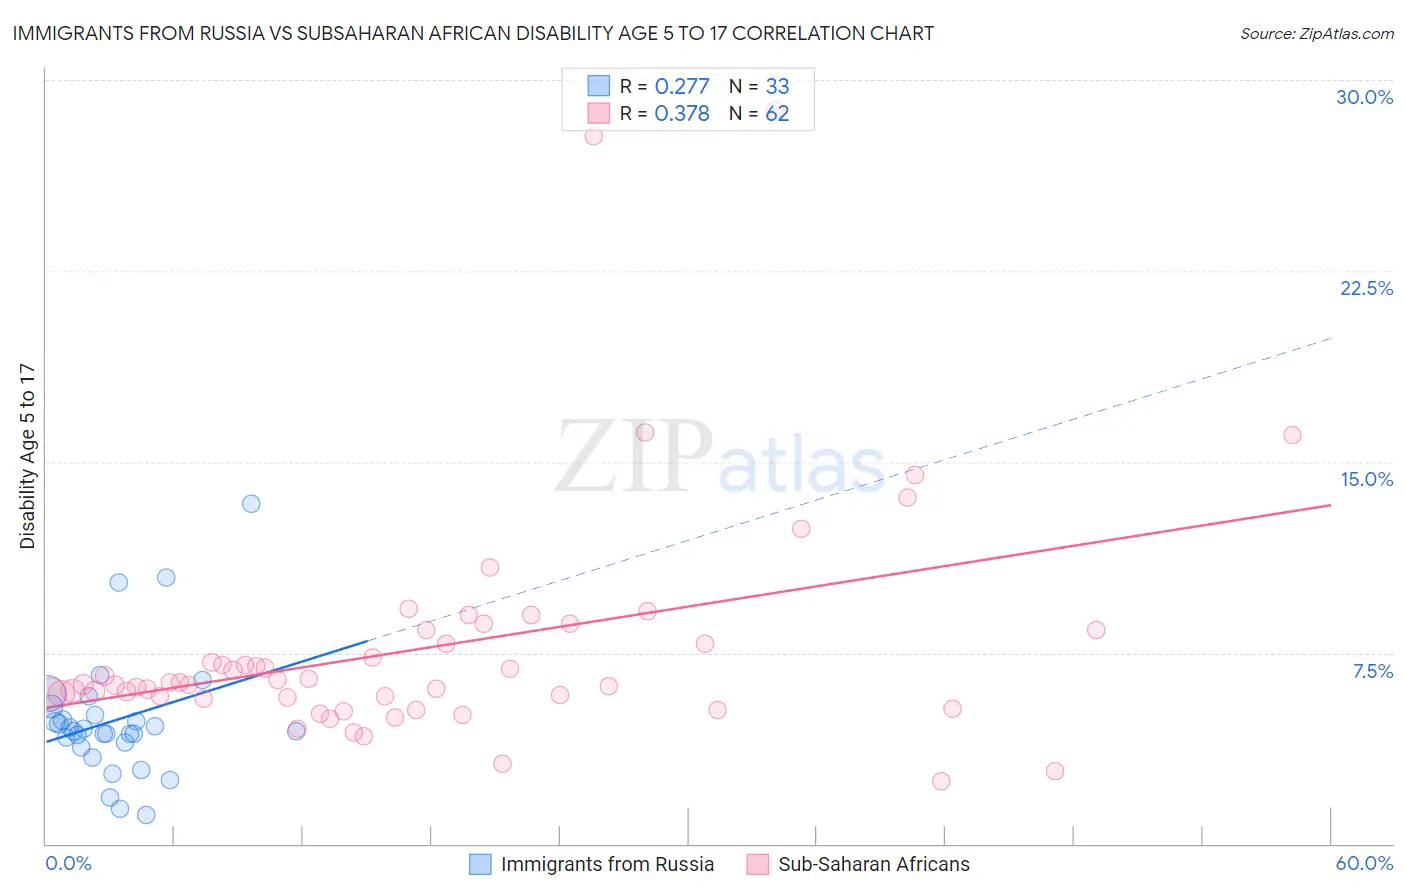 Immigrants from Russia vs Subsaharan African Disability Age 5 to 17